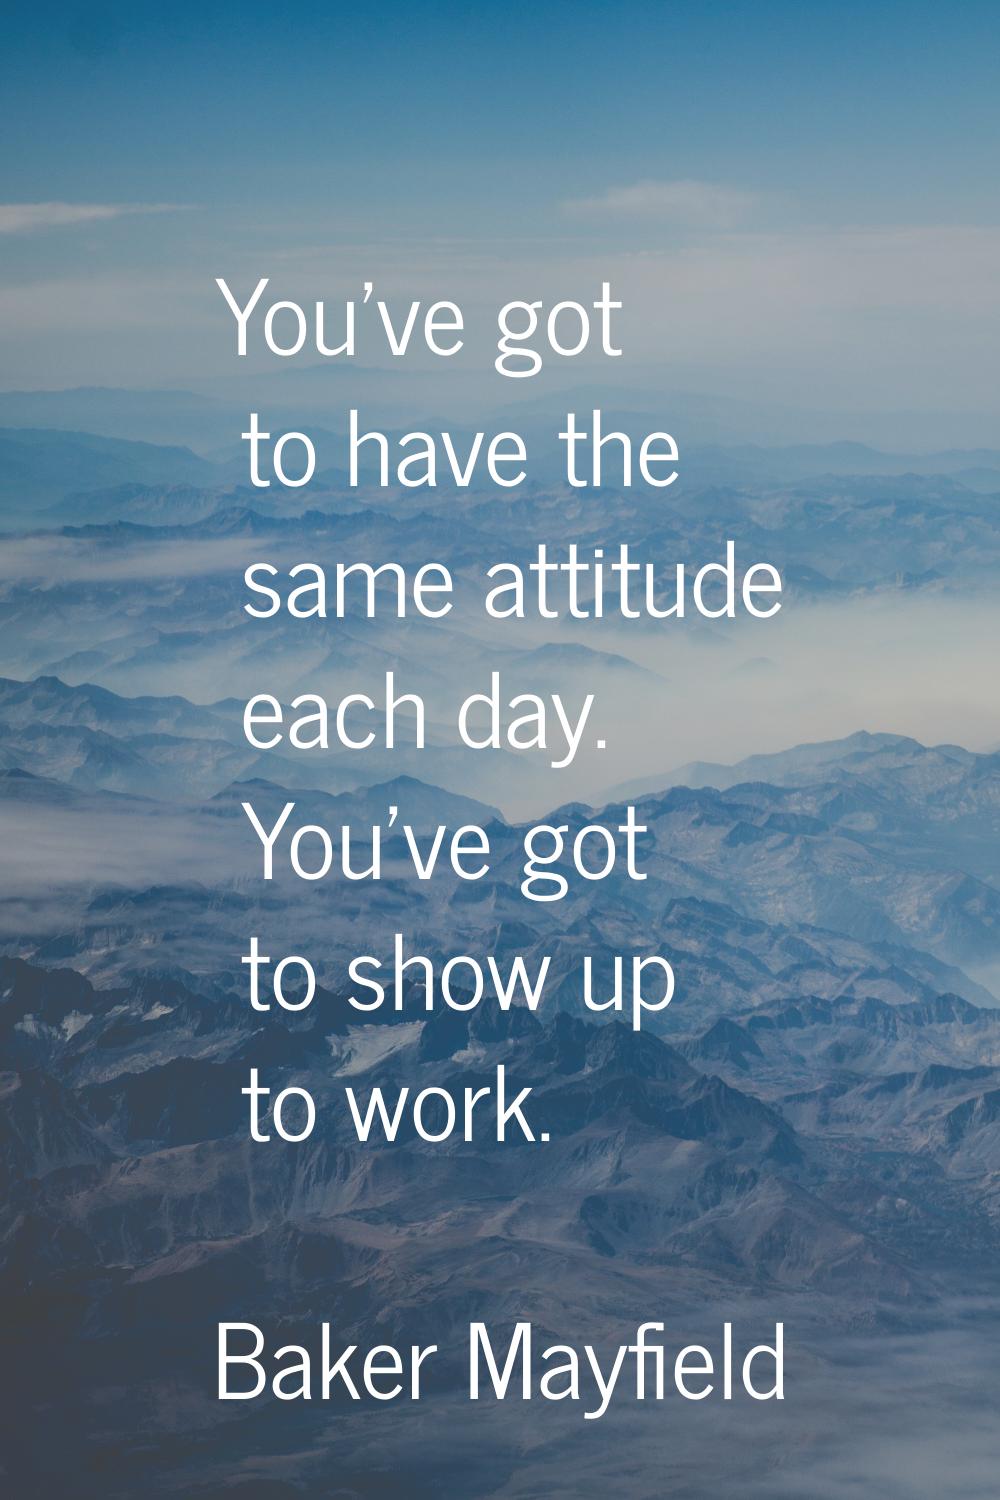 You've got to have the same attitude each day. You've got to show up to work.